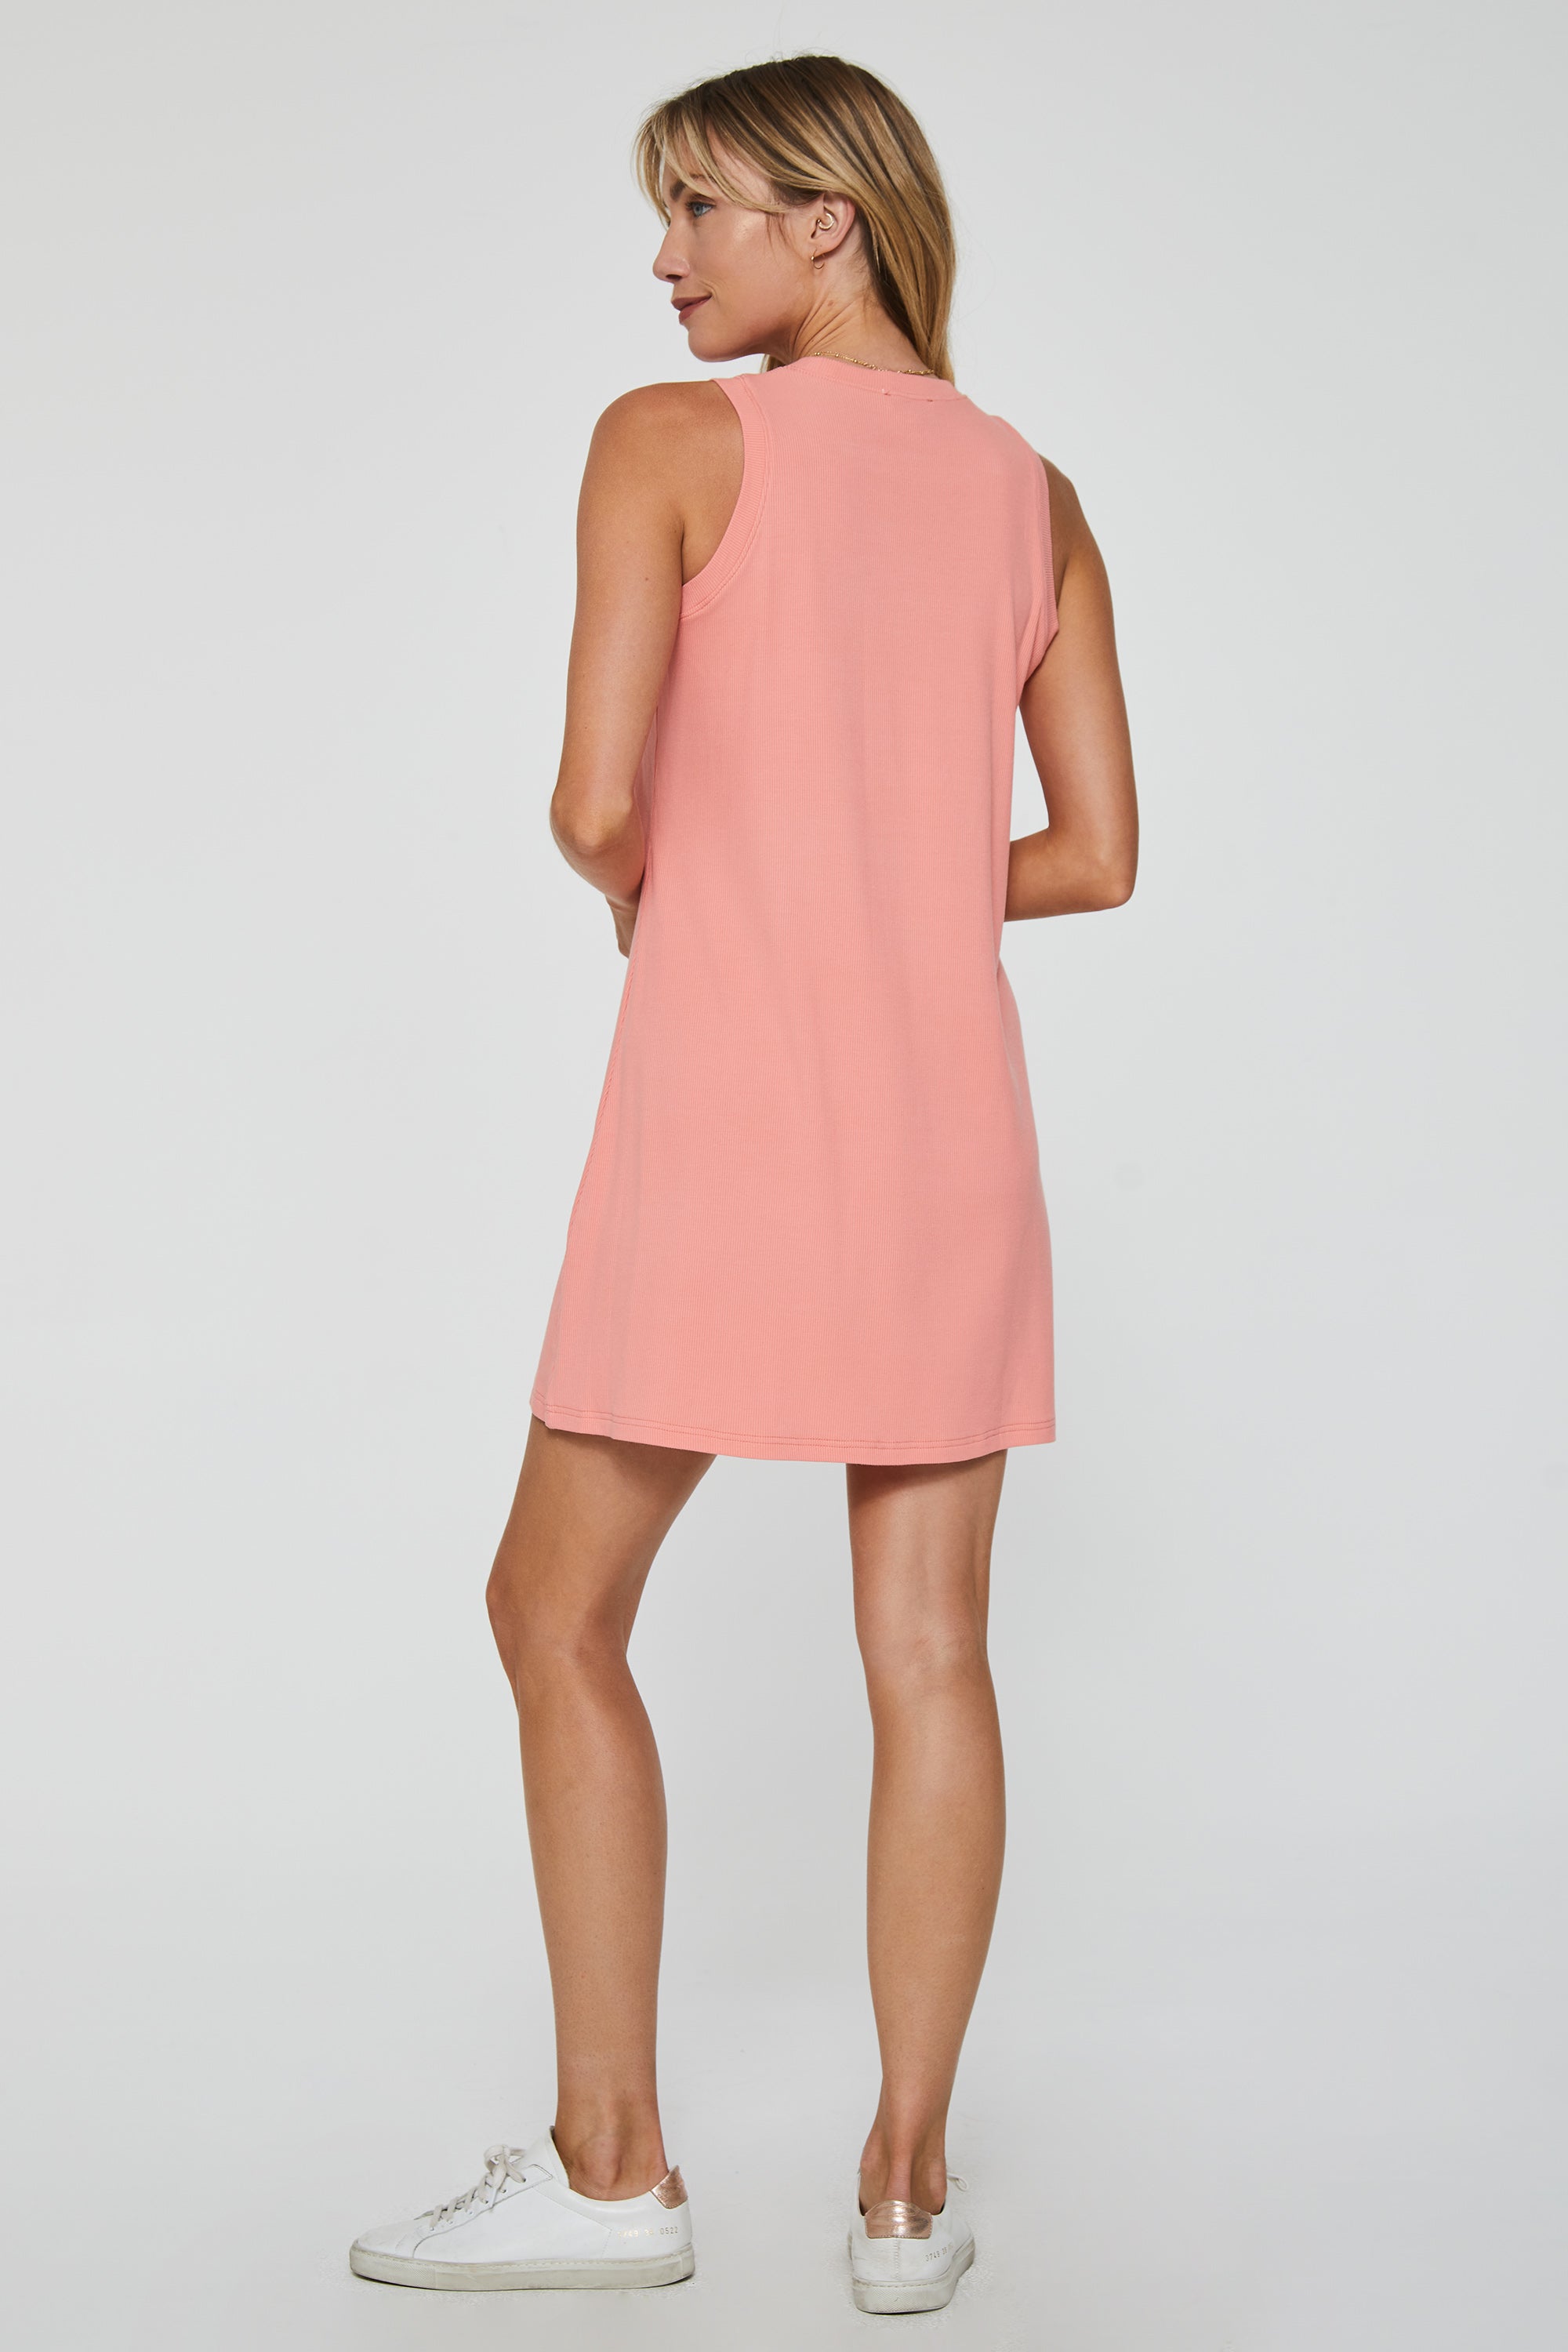 justine-ribbed-dress-burnt-coral-back-image-another-love-clothing